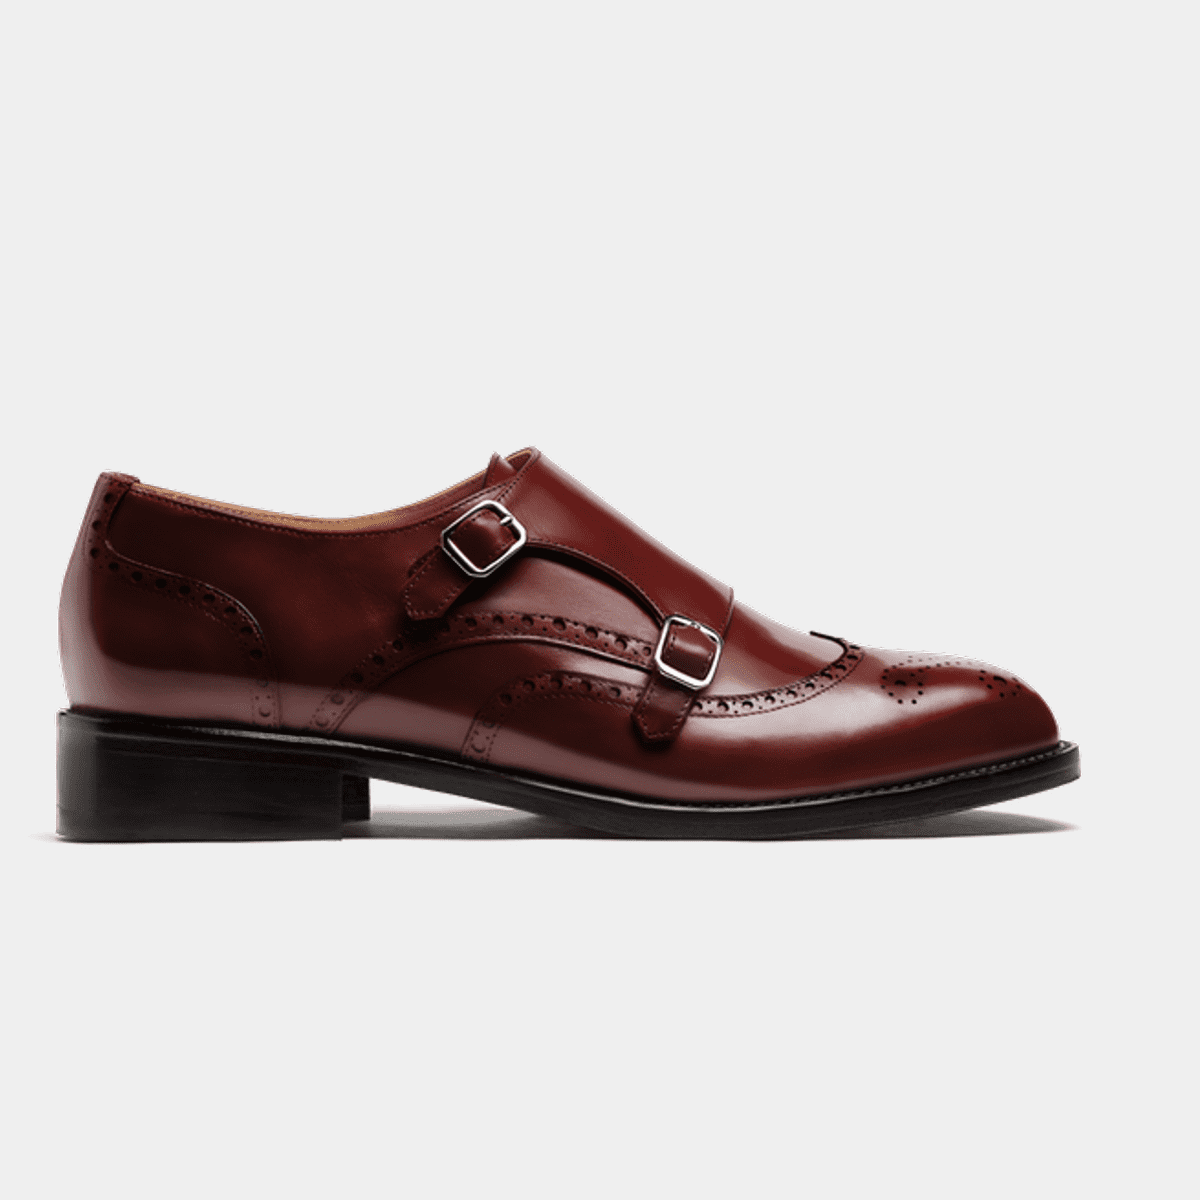 Monk Brogues - oxblood flora leather | Sumissura